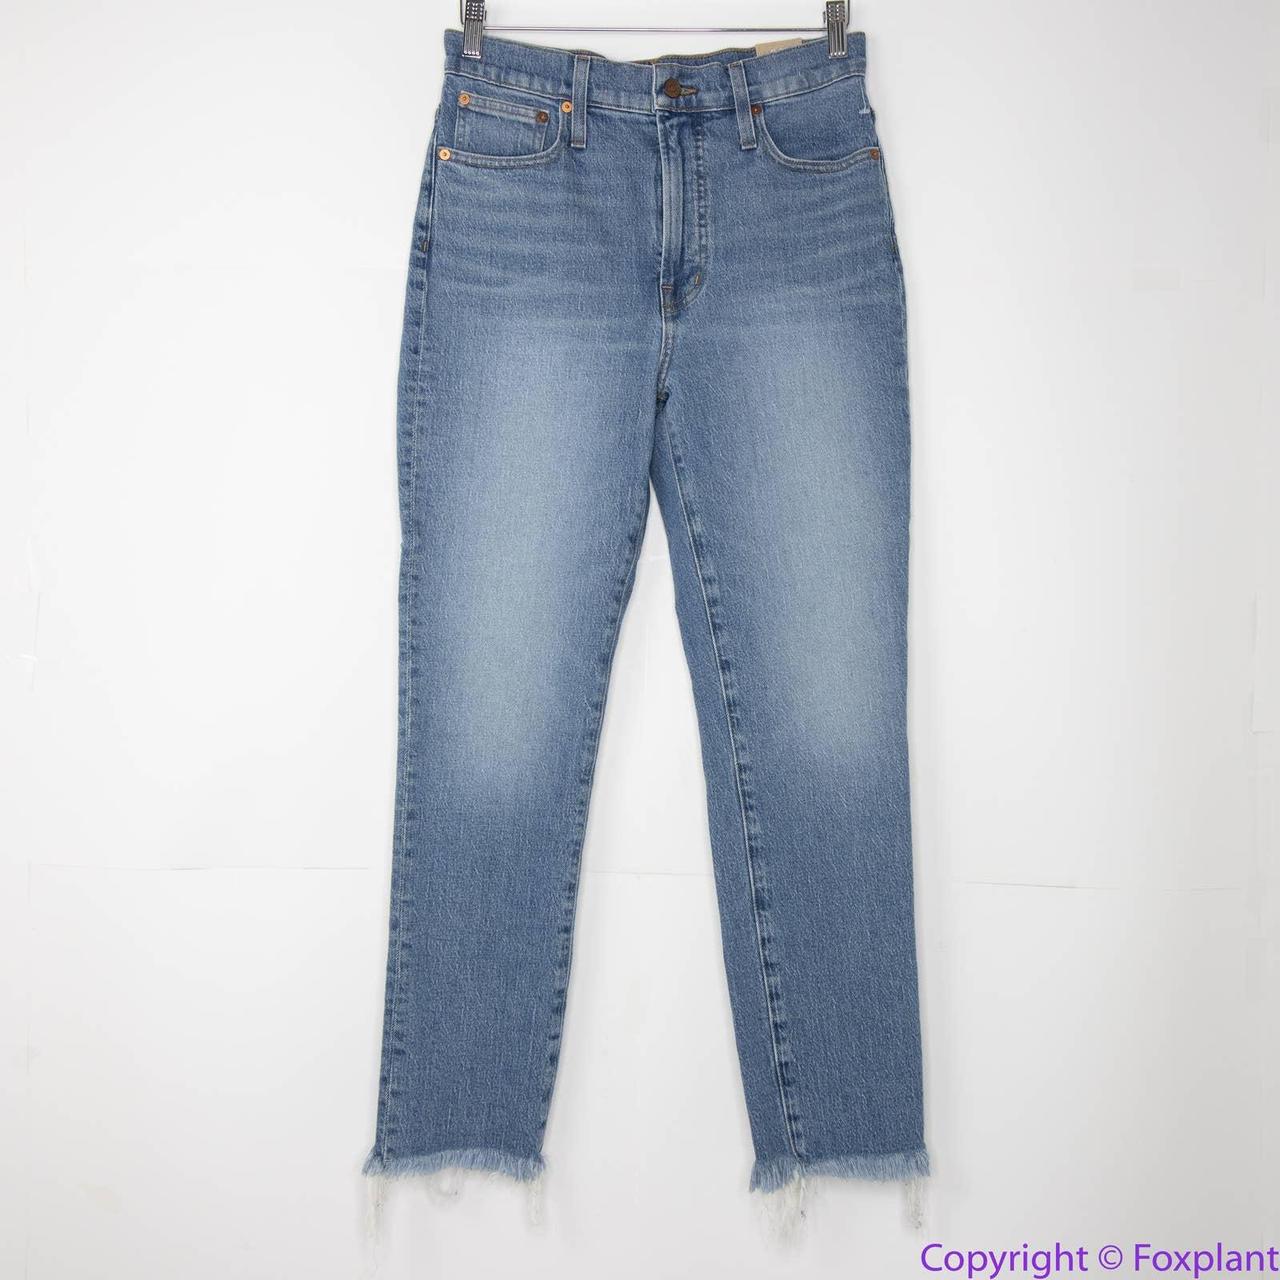 The Perfect Vintage Jean in Ainsworth Wash